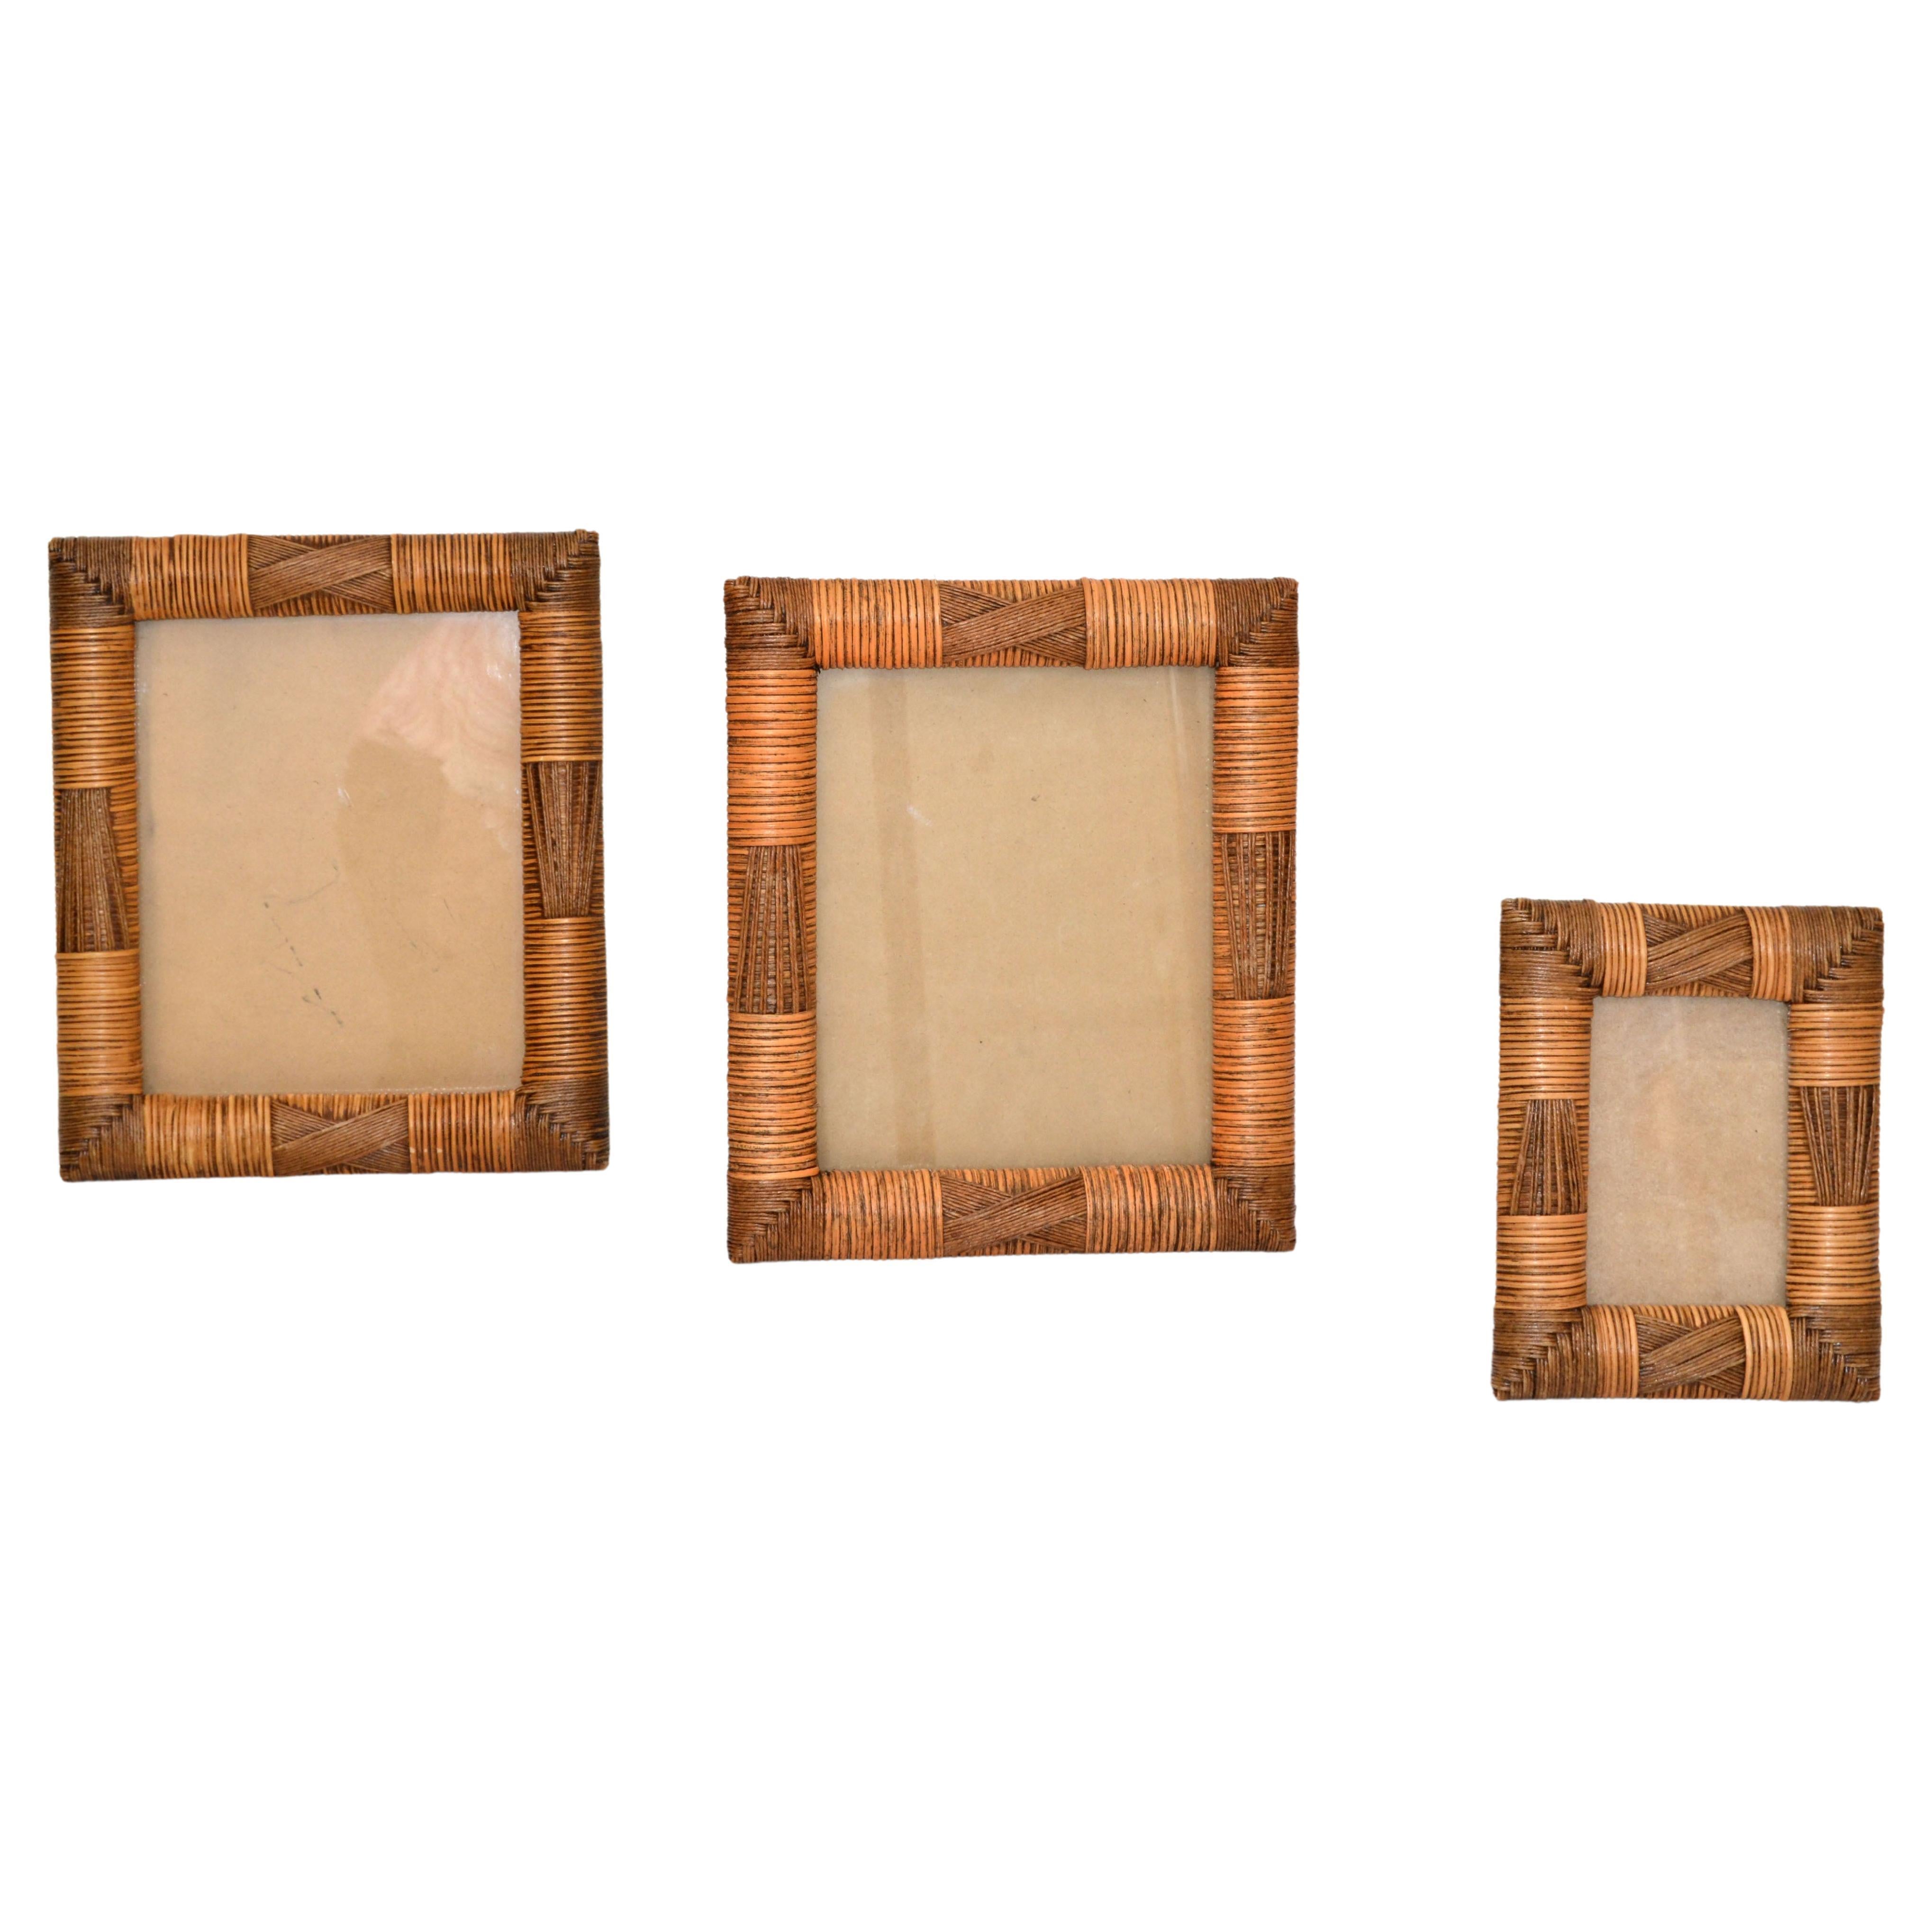 Set of 3 Cane, Wicker & Bamboo Picture Frames Bohemian Chic Mid-Century Modern